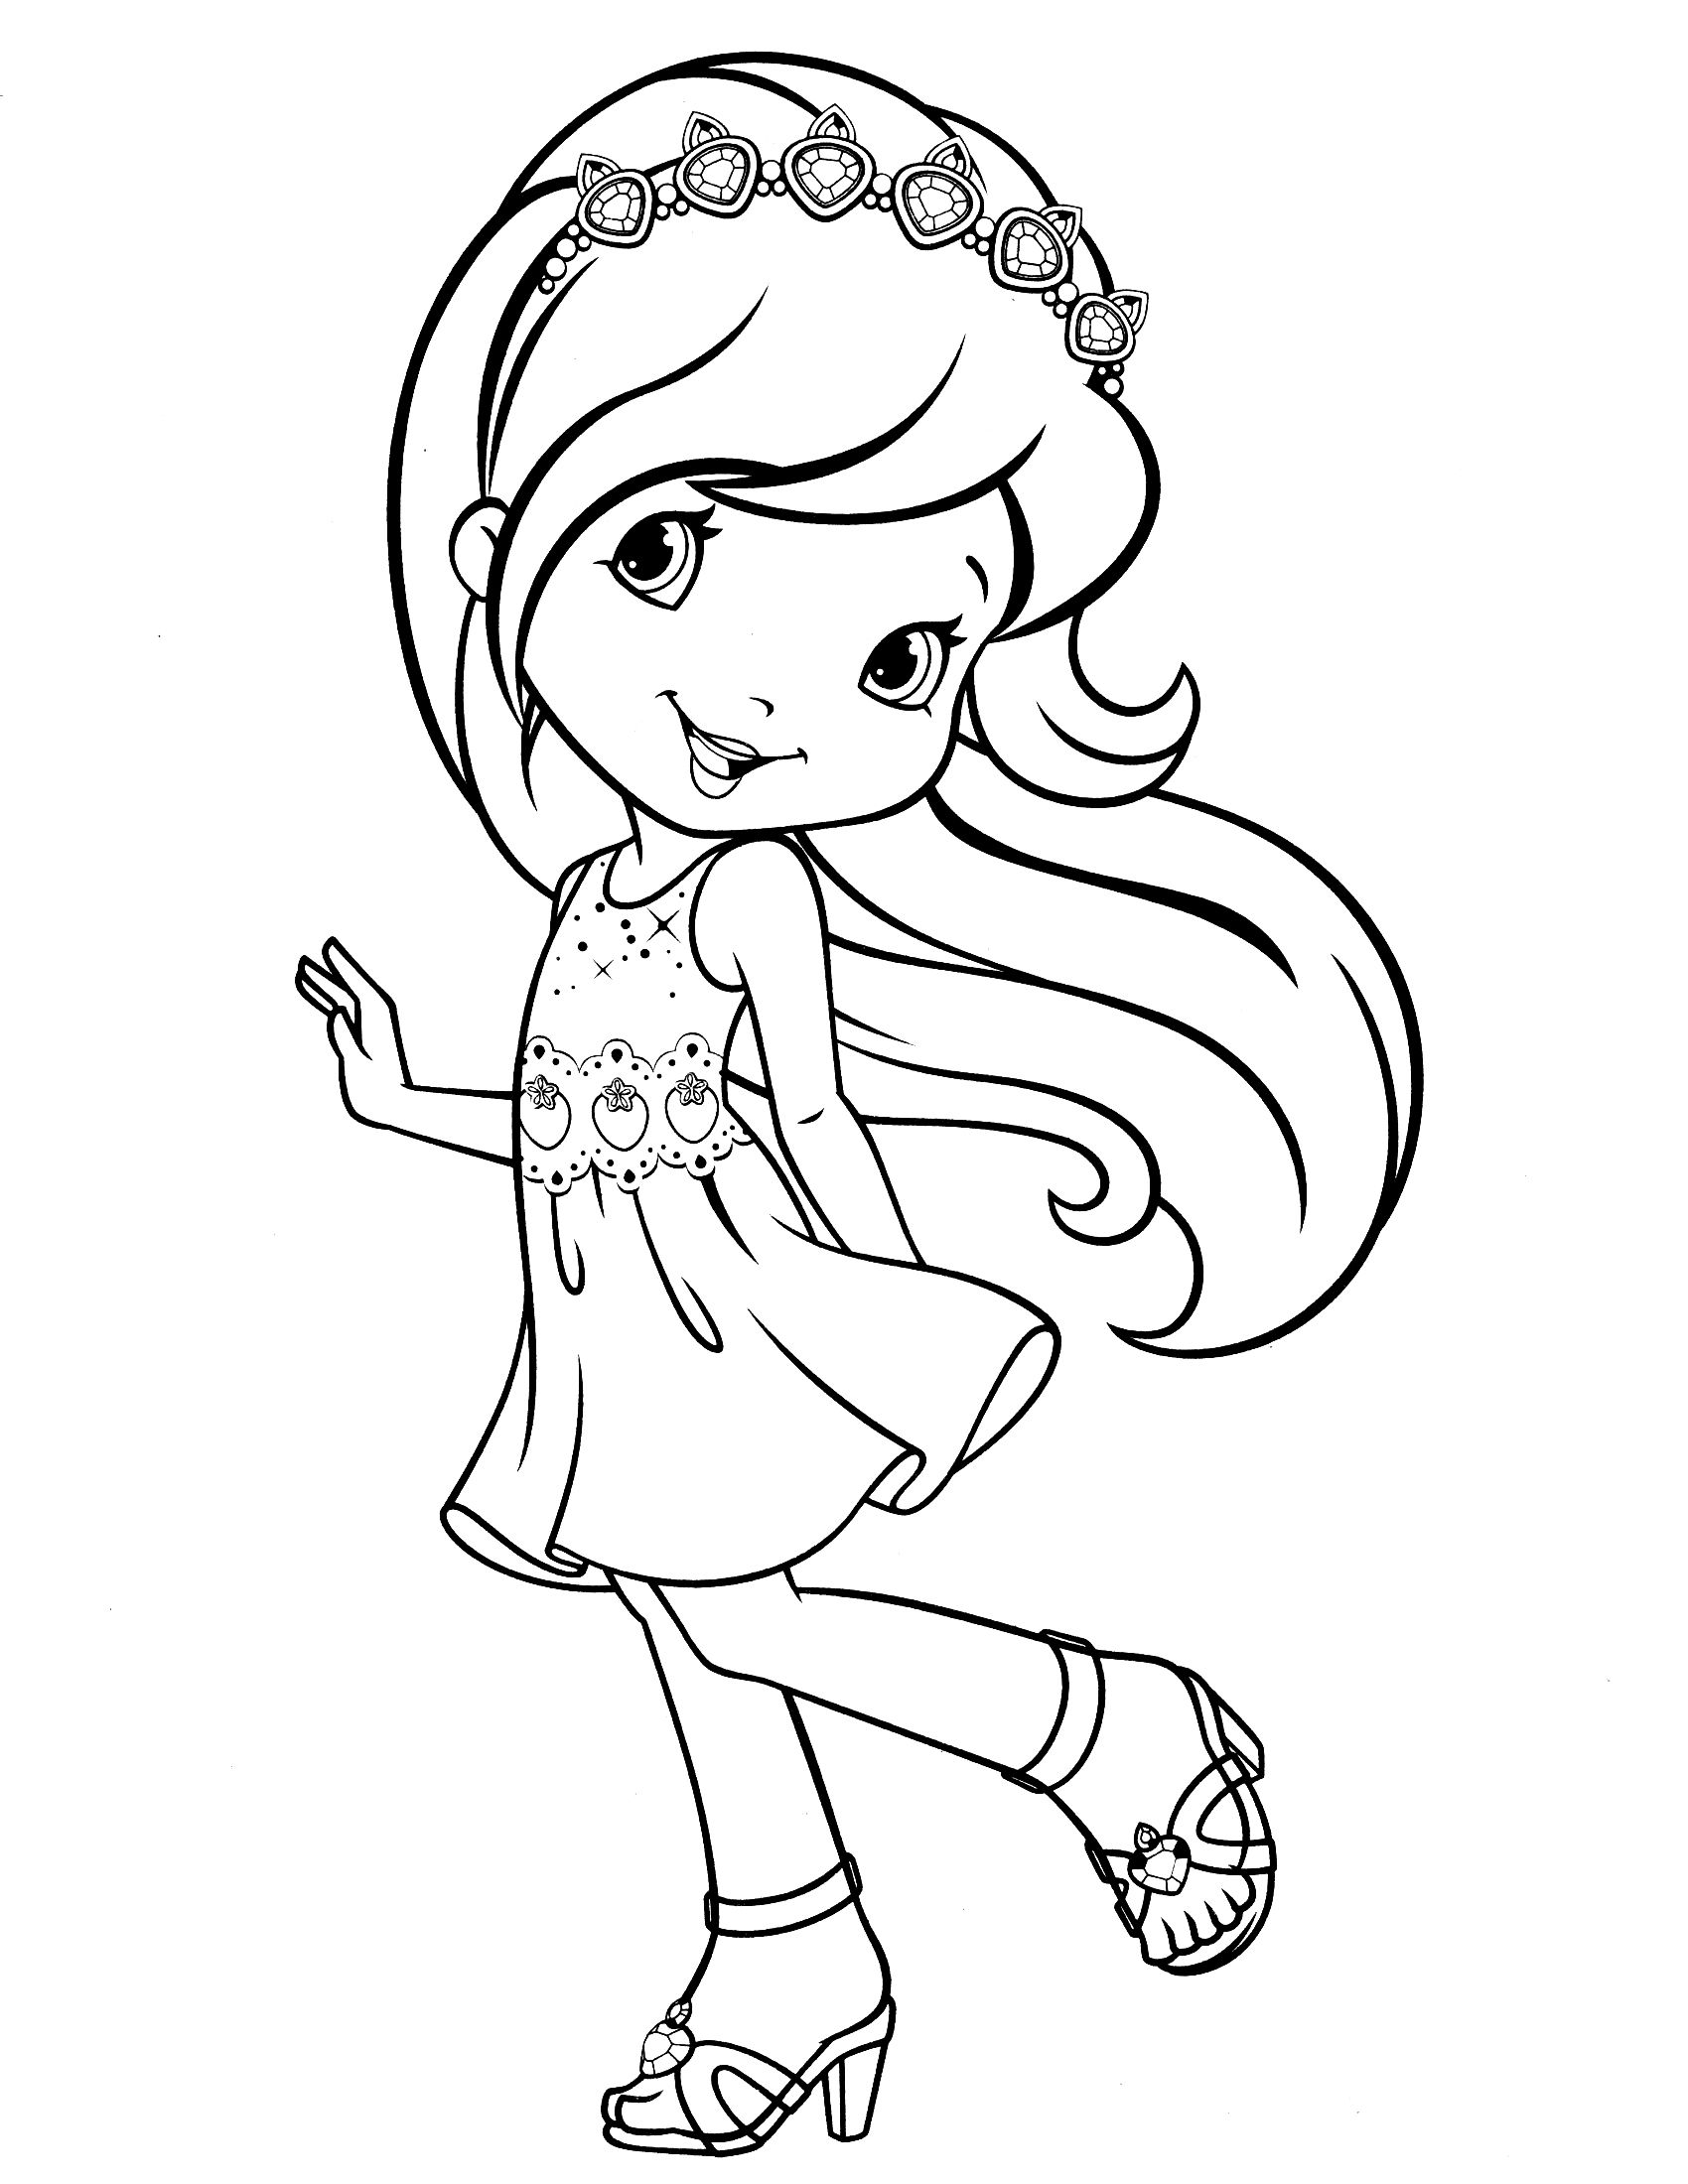 strawberry shortcake colouring pages to print baby strawberry shortcake rocks strawberry shortcake shortcake print to strawberry colouring pages 